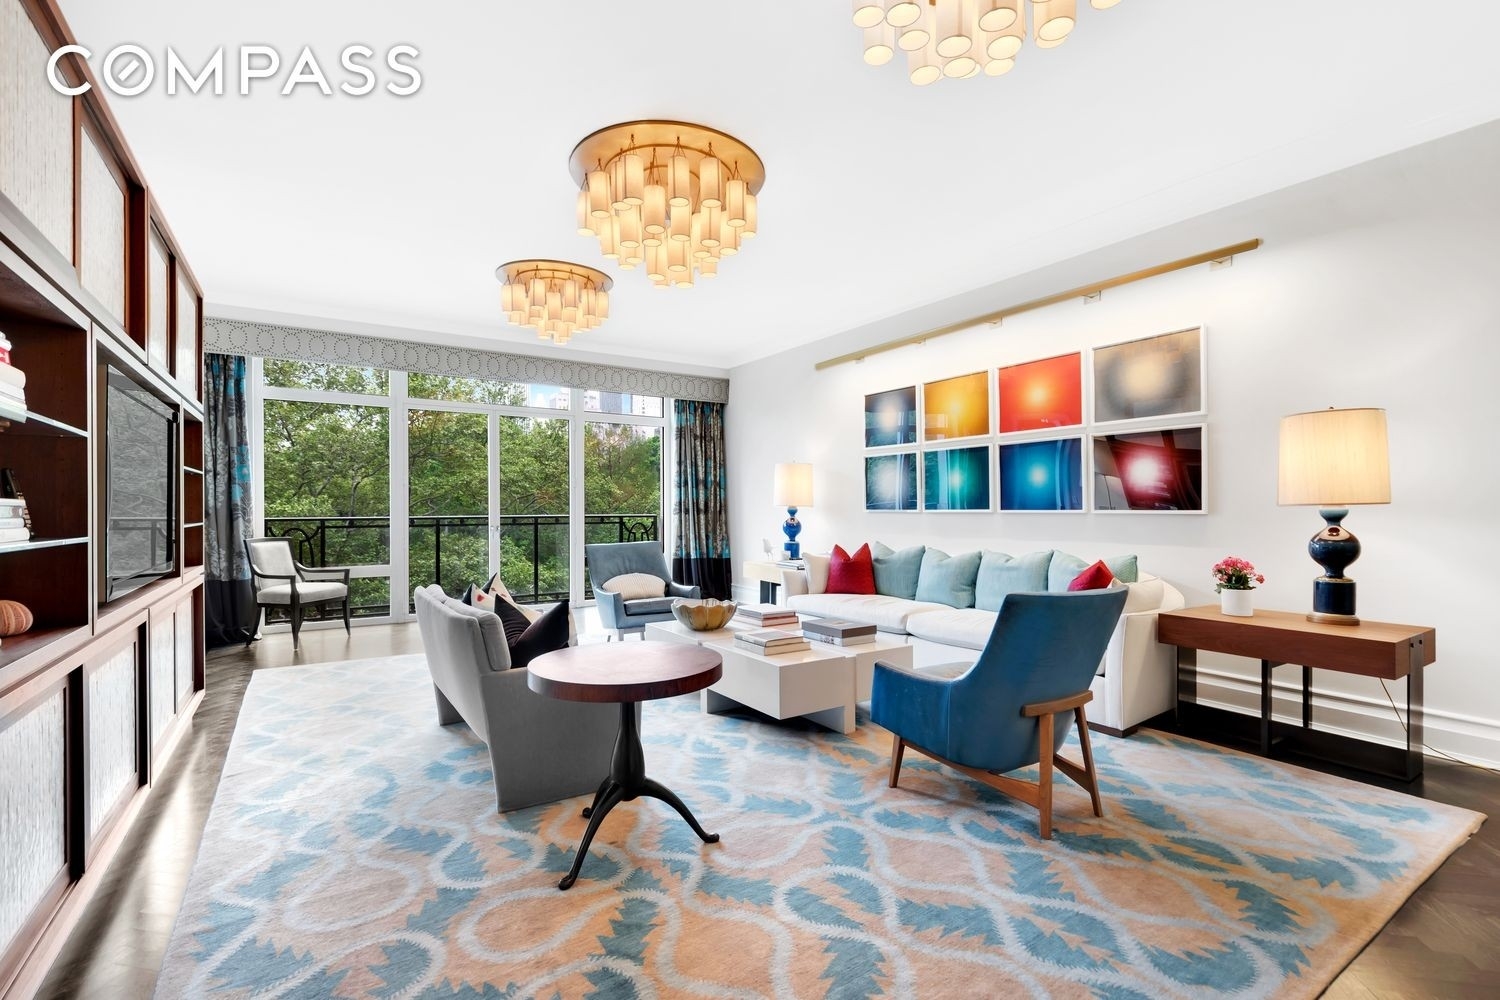 Property en 15 Cpw, 15 CENTRAL PARK W, 5B Lincoln Square, New York, Nueva York 10023